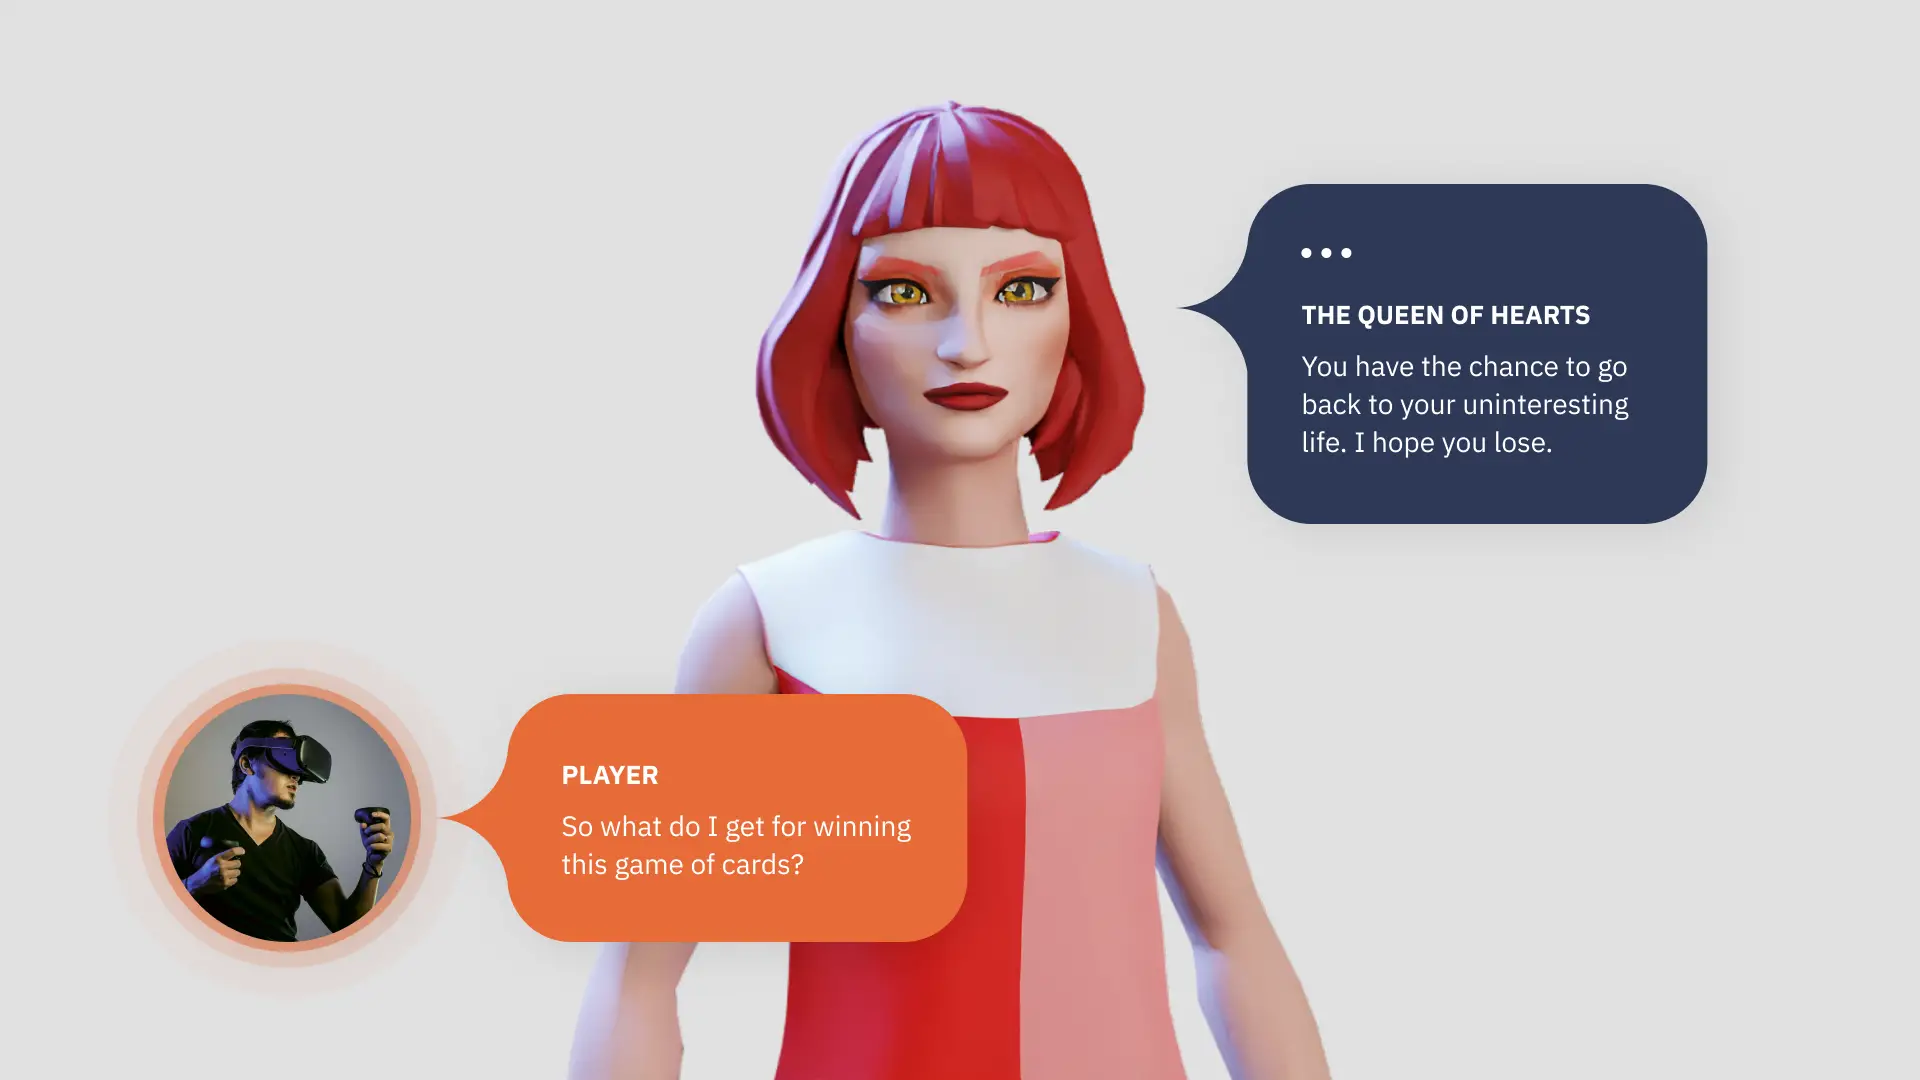 Inworld AI Raises $50M to Help Create Interactive AI Characters for Gaming and the Metaverse